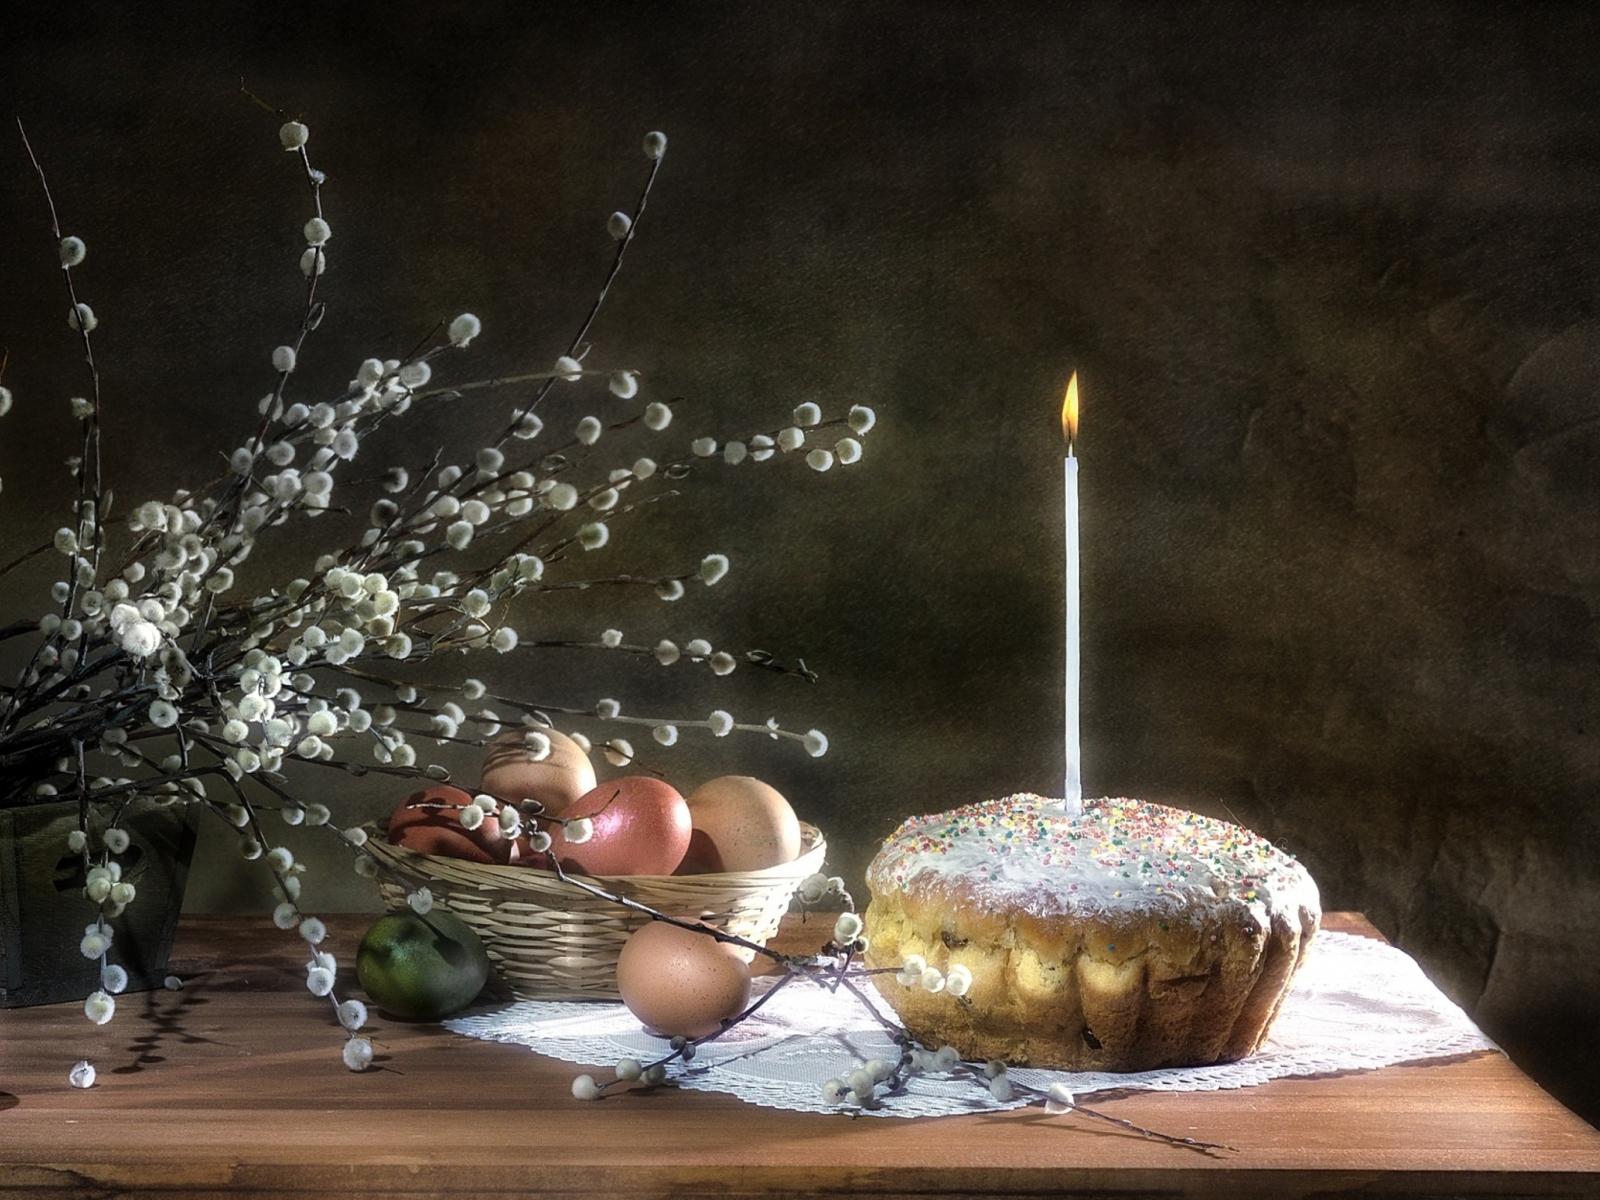 Das Easter Cake With Candle Wallpaper 1600x1200